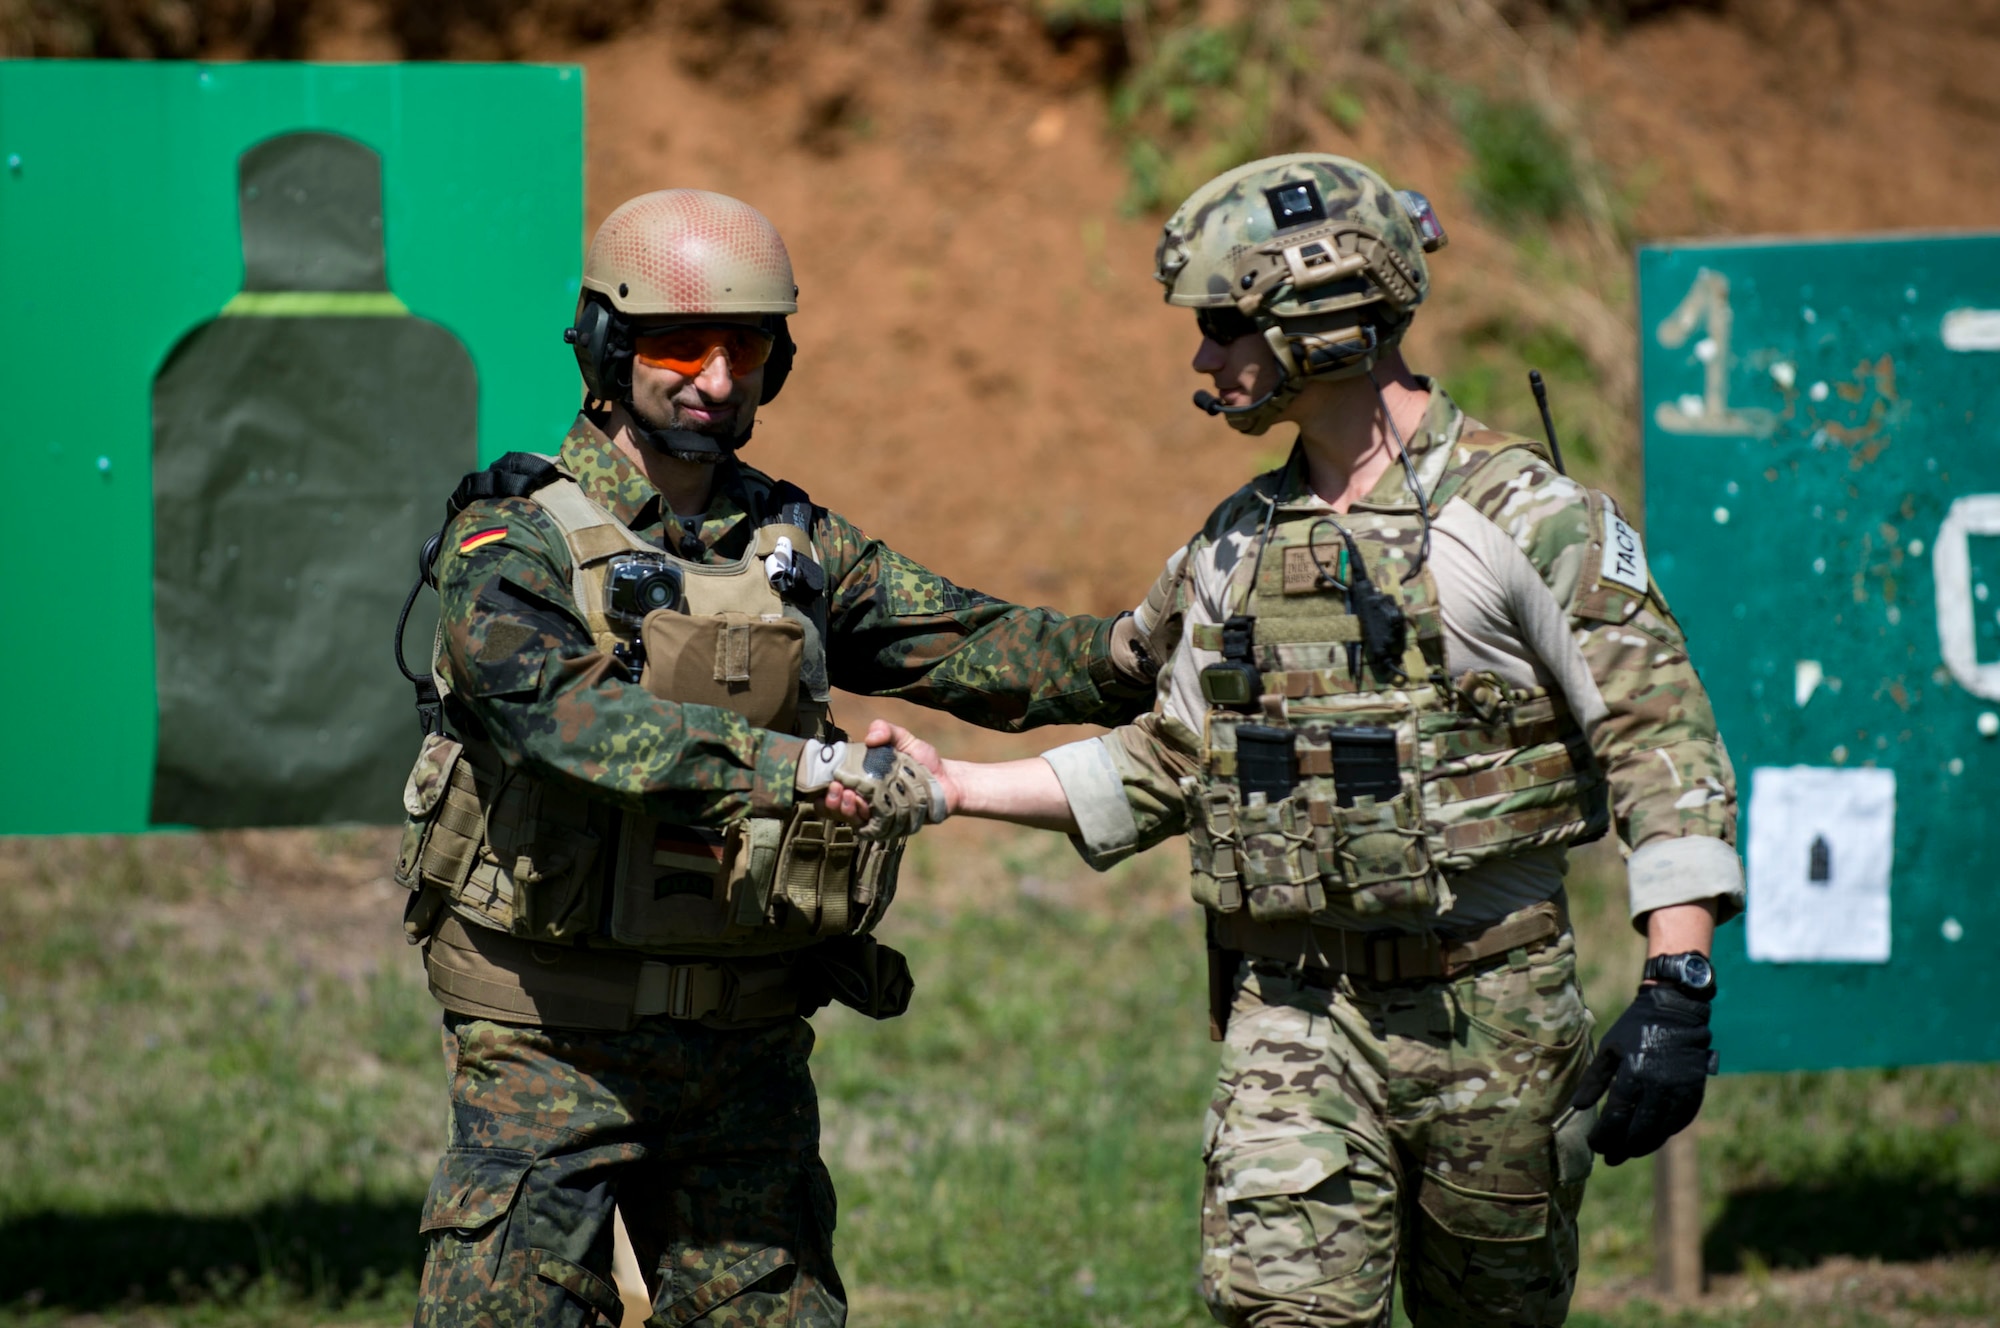 German Air Force Maj. Nader Samadi, German Air Ground Operations Squadron commander left, congratulates U.S. Air Force Ryan Hawkins 19th Air Ground Operations Squadron Tactical Air Control Party specialist, during the shooting portion of a German armed forces proficiency assessment, April 4, 2017, at Fort Campbell, Ky. To enhance their ability to work together in deployed locations, members of the German Air Force travelled to Fort Campbell to train and exercise with the 19th ASOS. While at Fort Campbell, The German Air Force members hosted a German armed forces proficiency assessment for Airmen consisting of shooting firearms, swimming, agility exercises and a rucksack march.